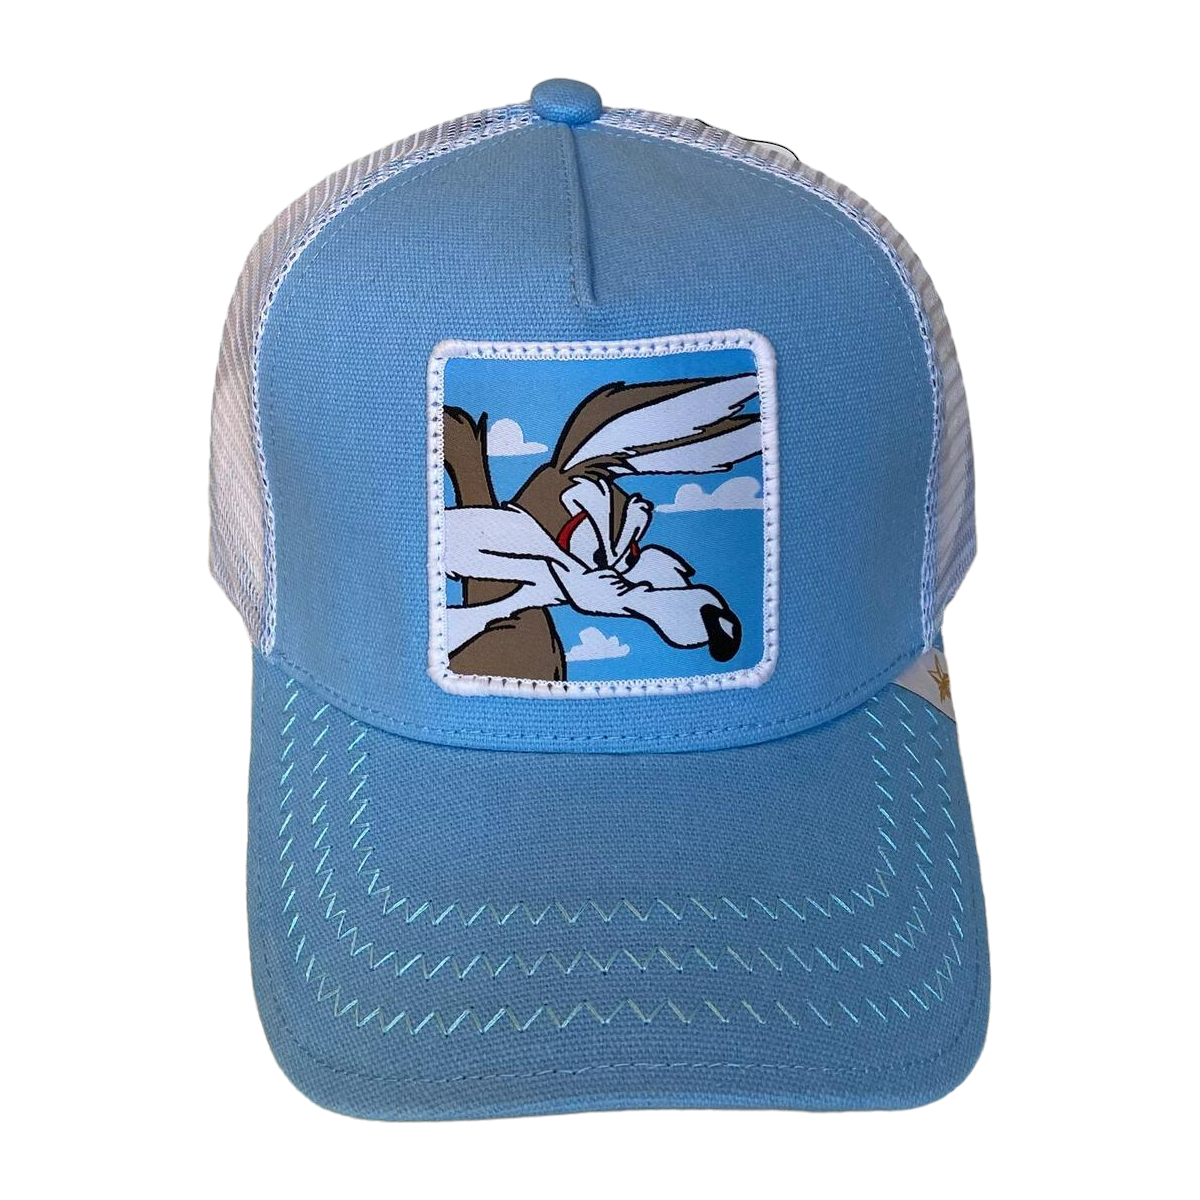 GOLD STAR-&quot;WILE E COYOTE&quot; TRUCKER HAT - BLUE/WHITE